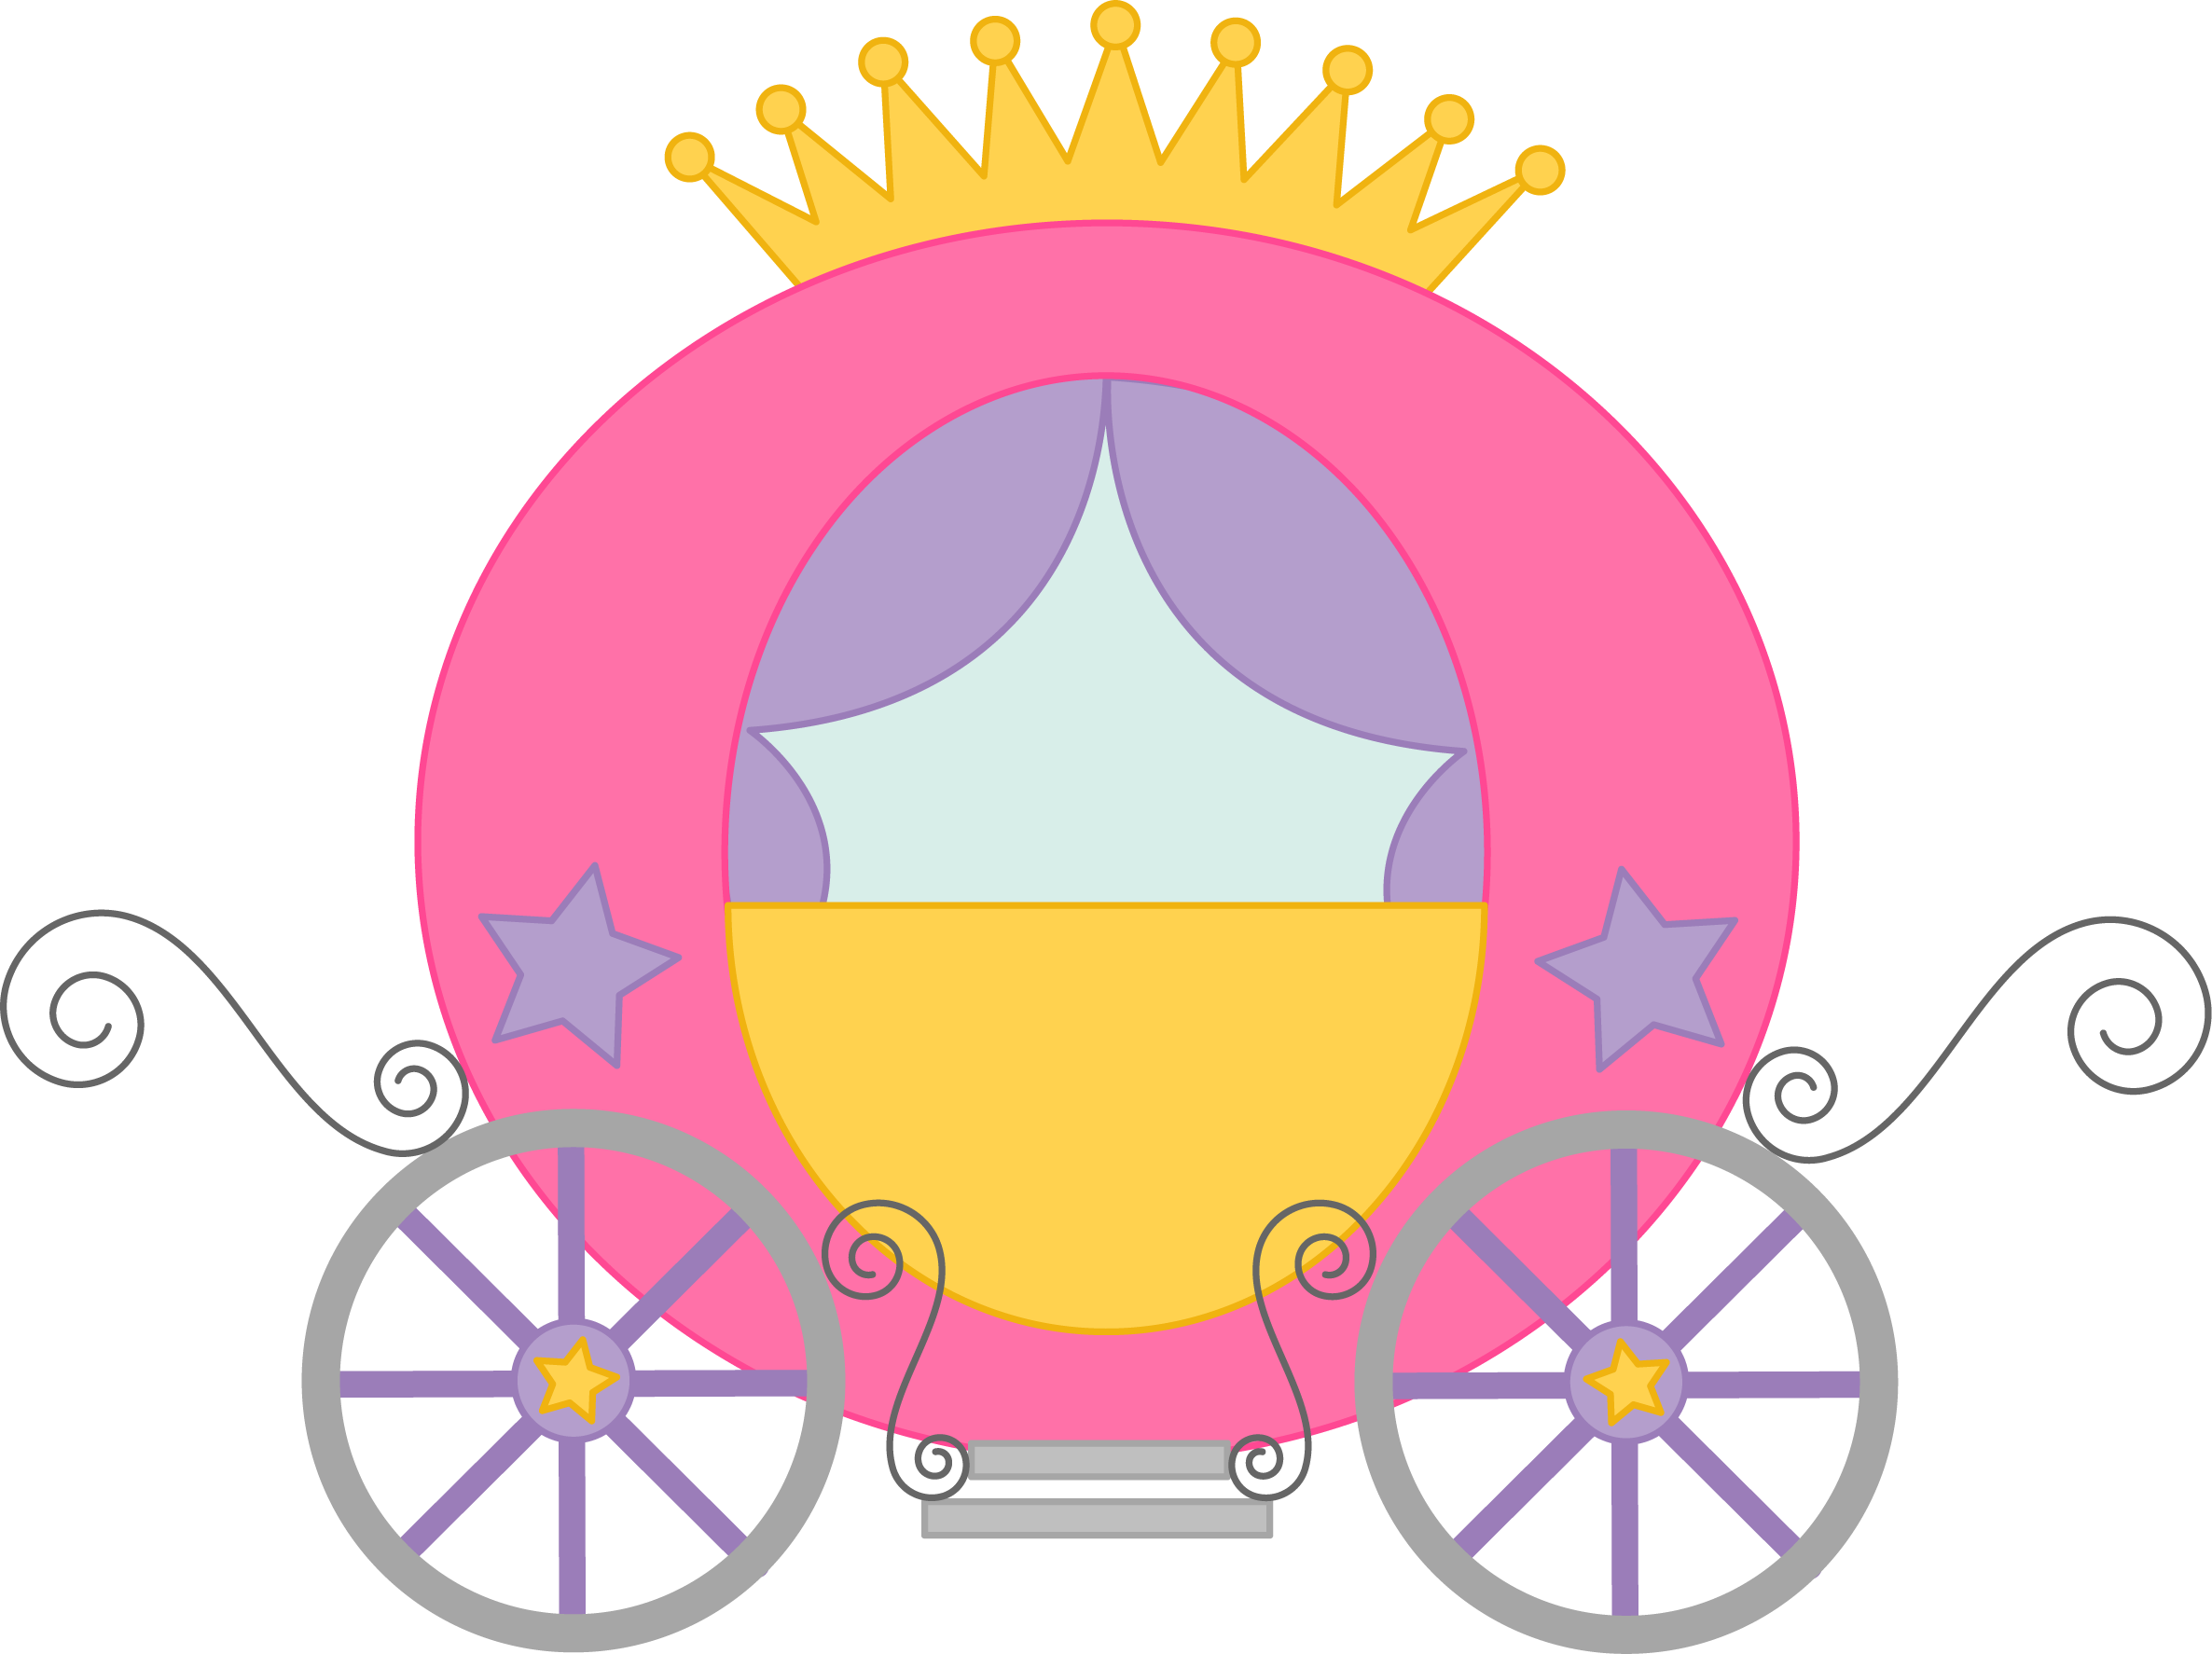 Carriage Clipart - ClipArt Best
 Disney Cinderella Carriage Clipart